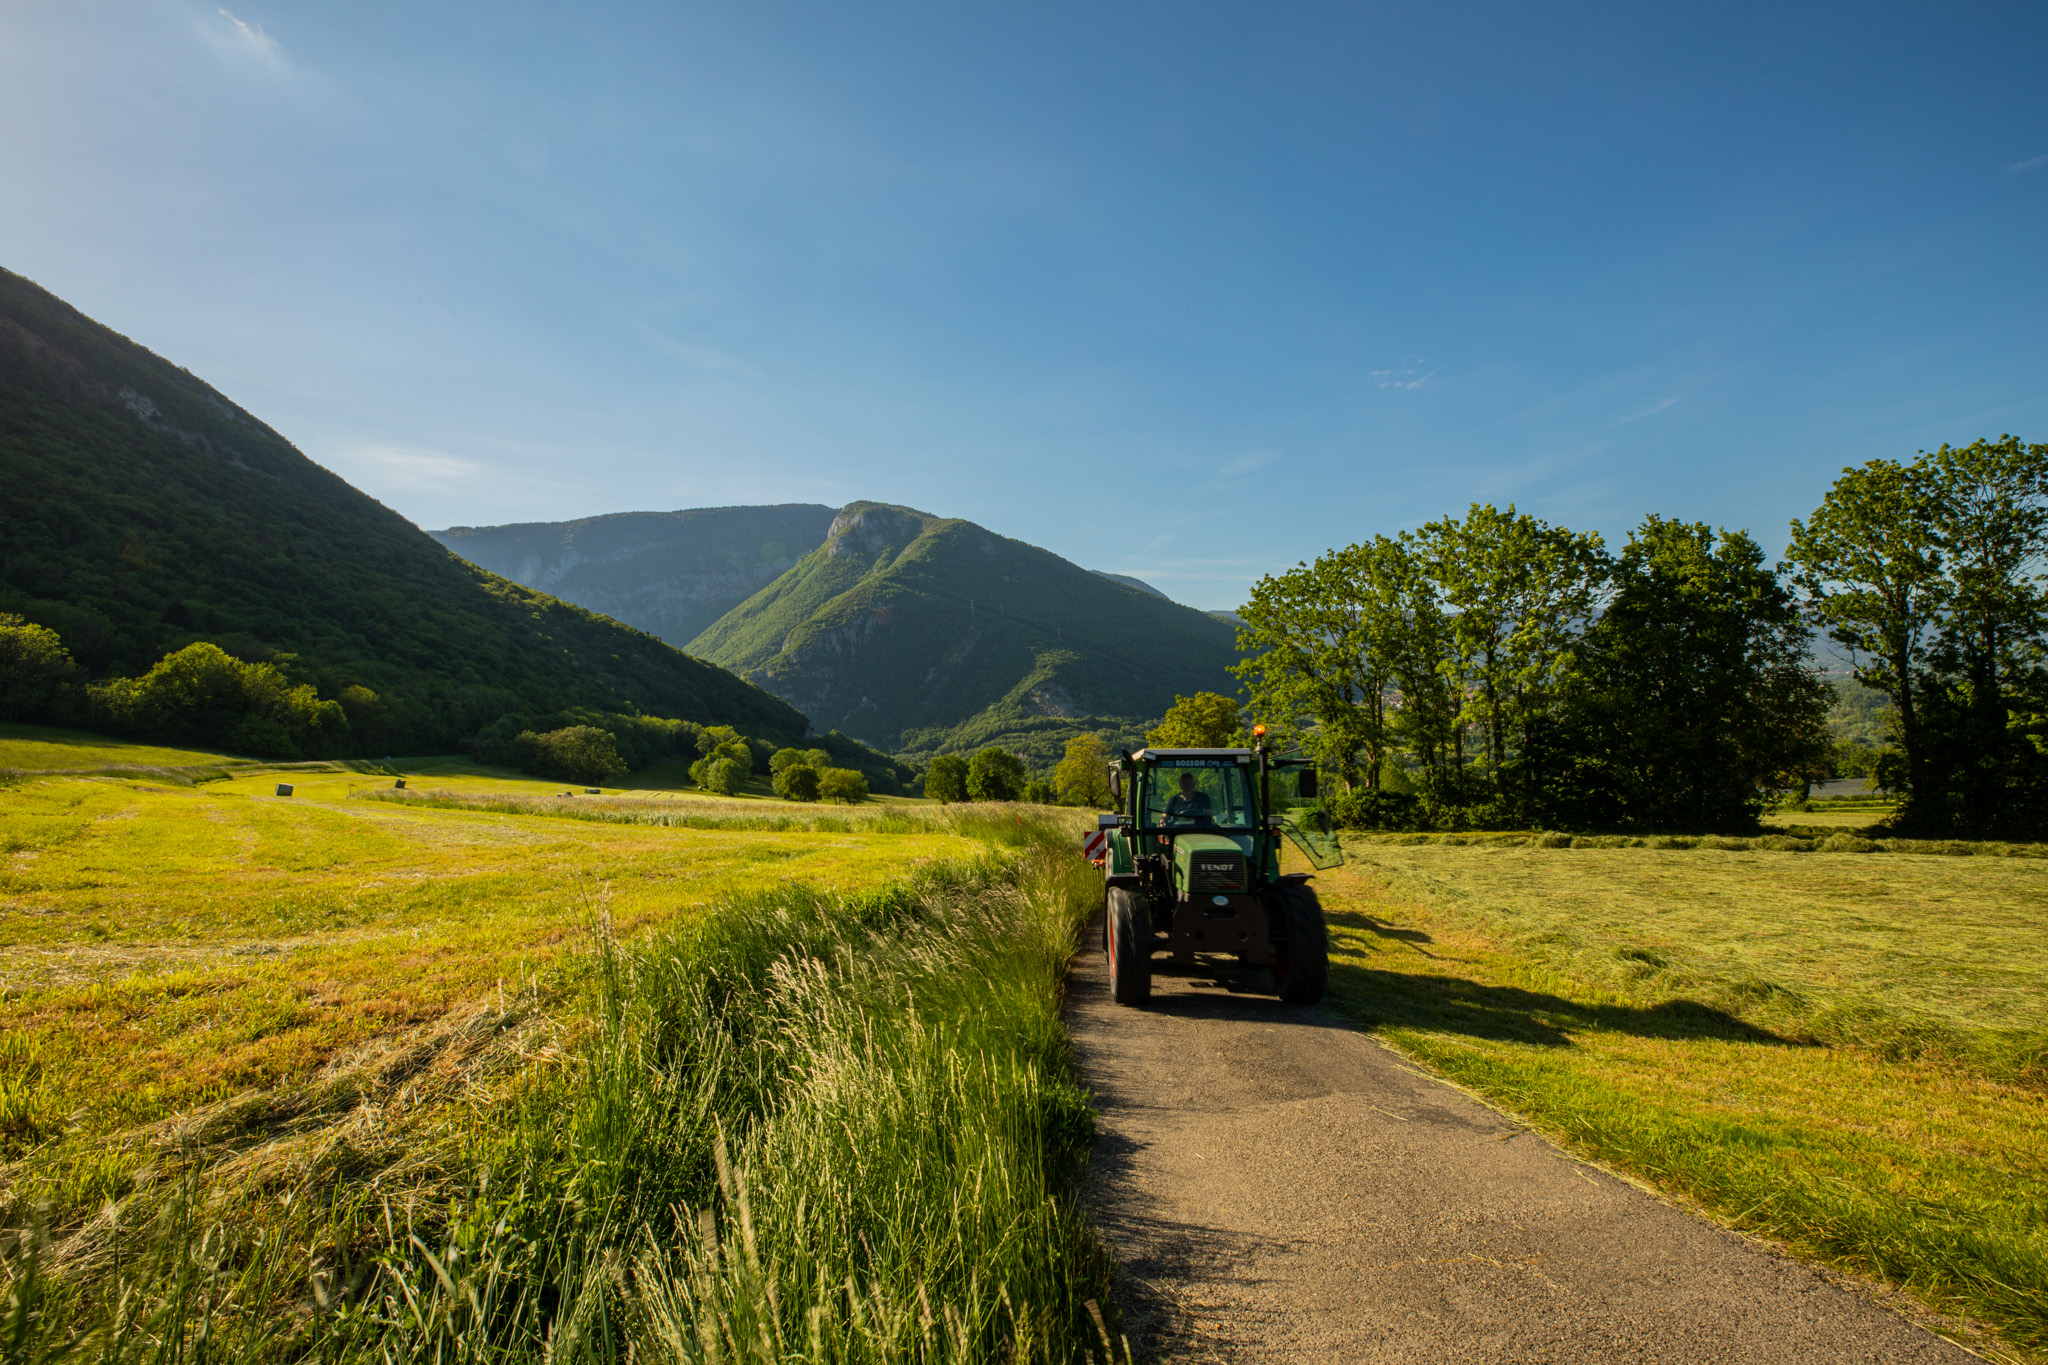 General 2048x1365 photography outdoors trees greenery nature grass field farm tractors mountains road landscape path